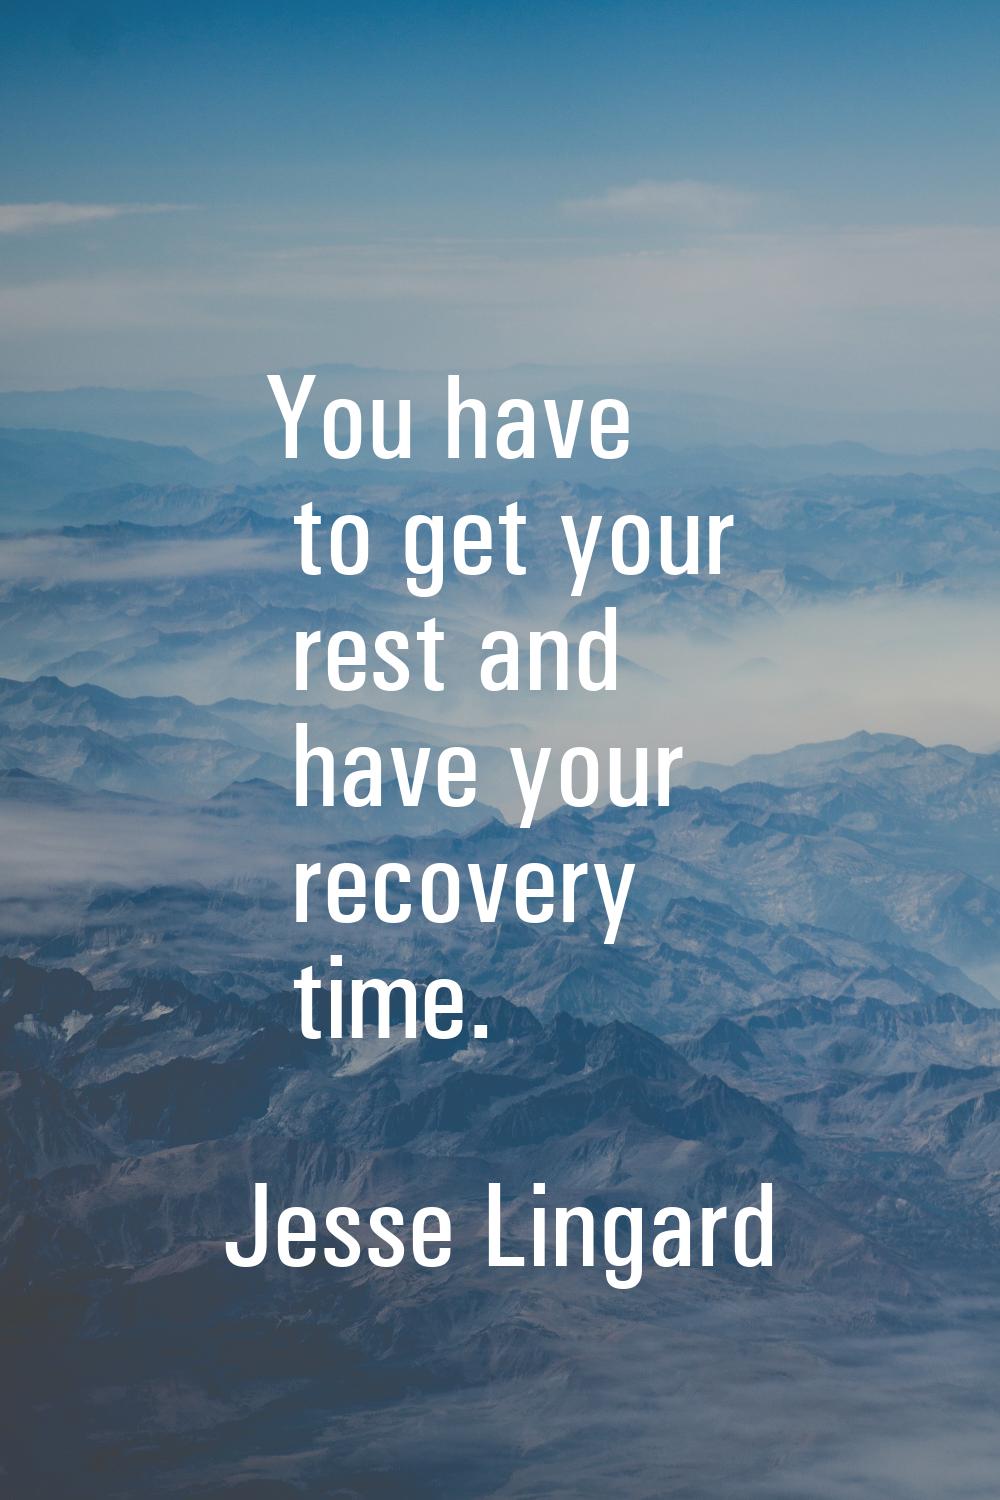 You have to get your rest and have your recovery time.